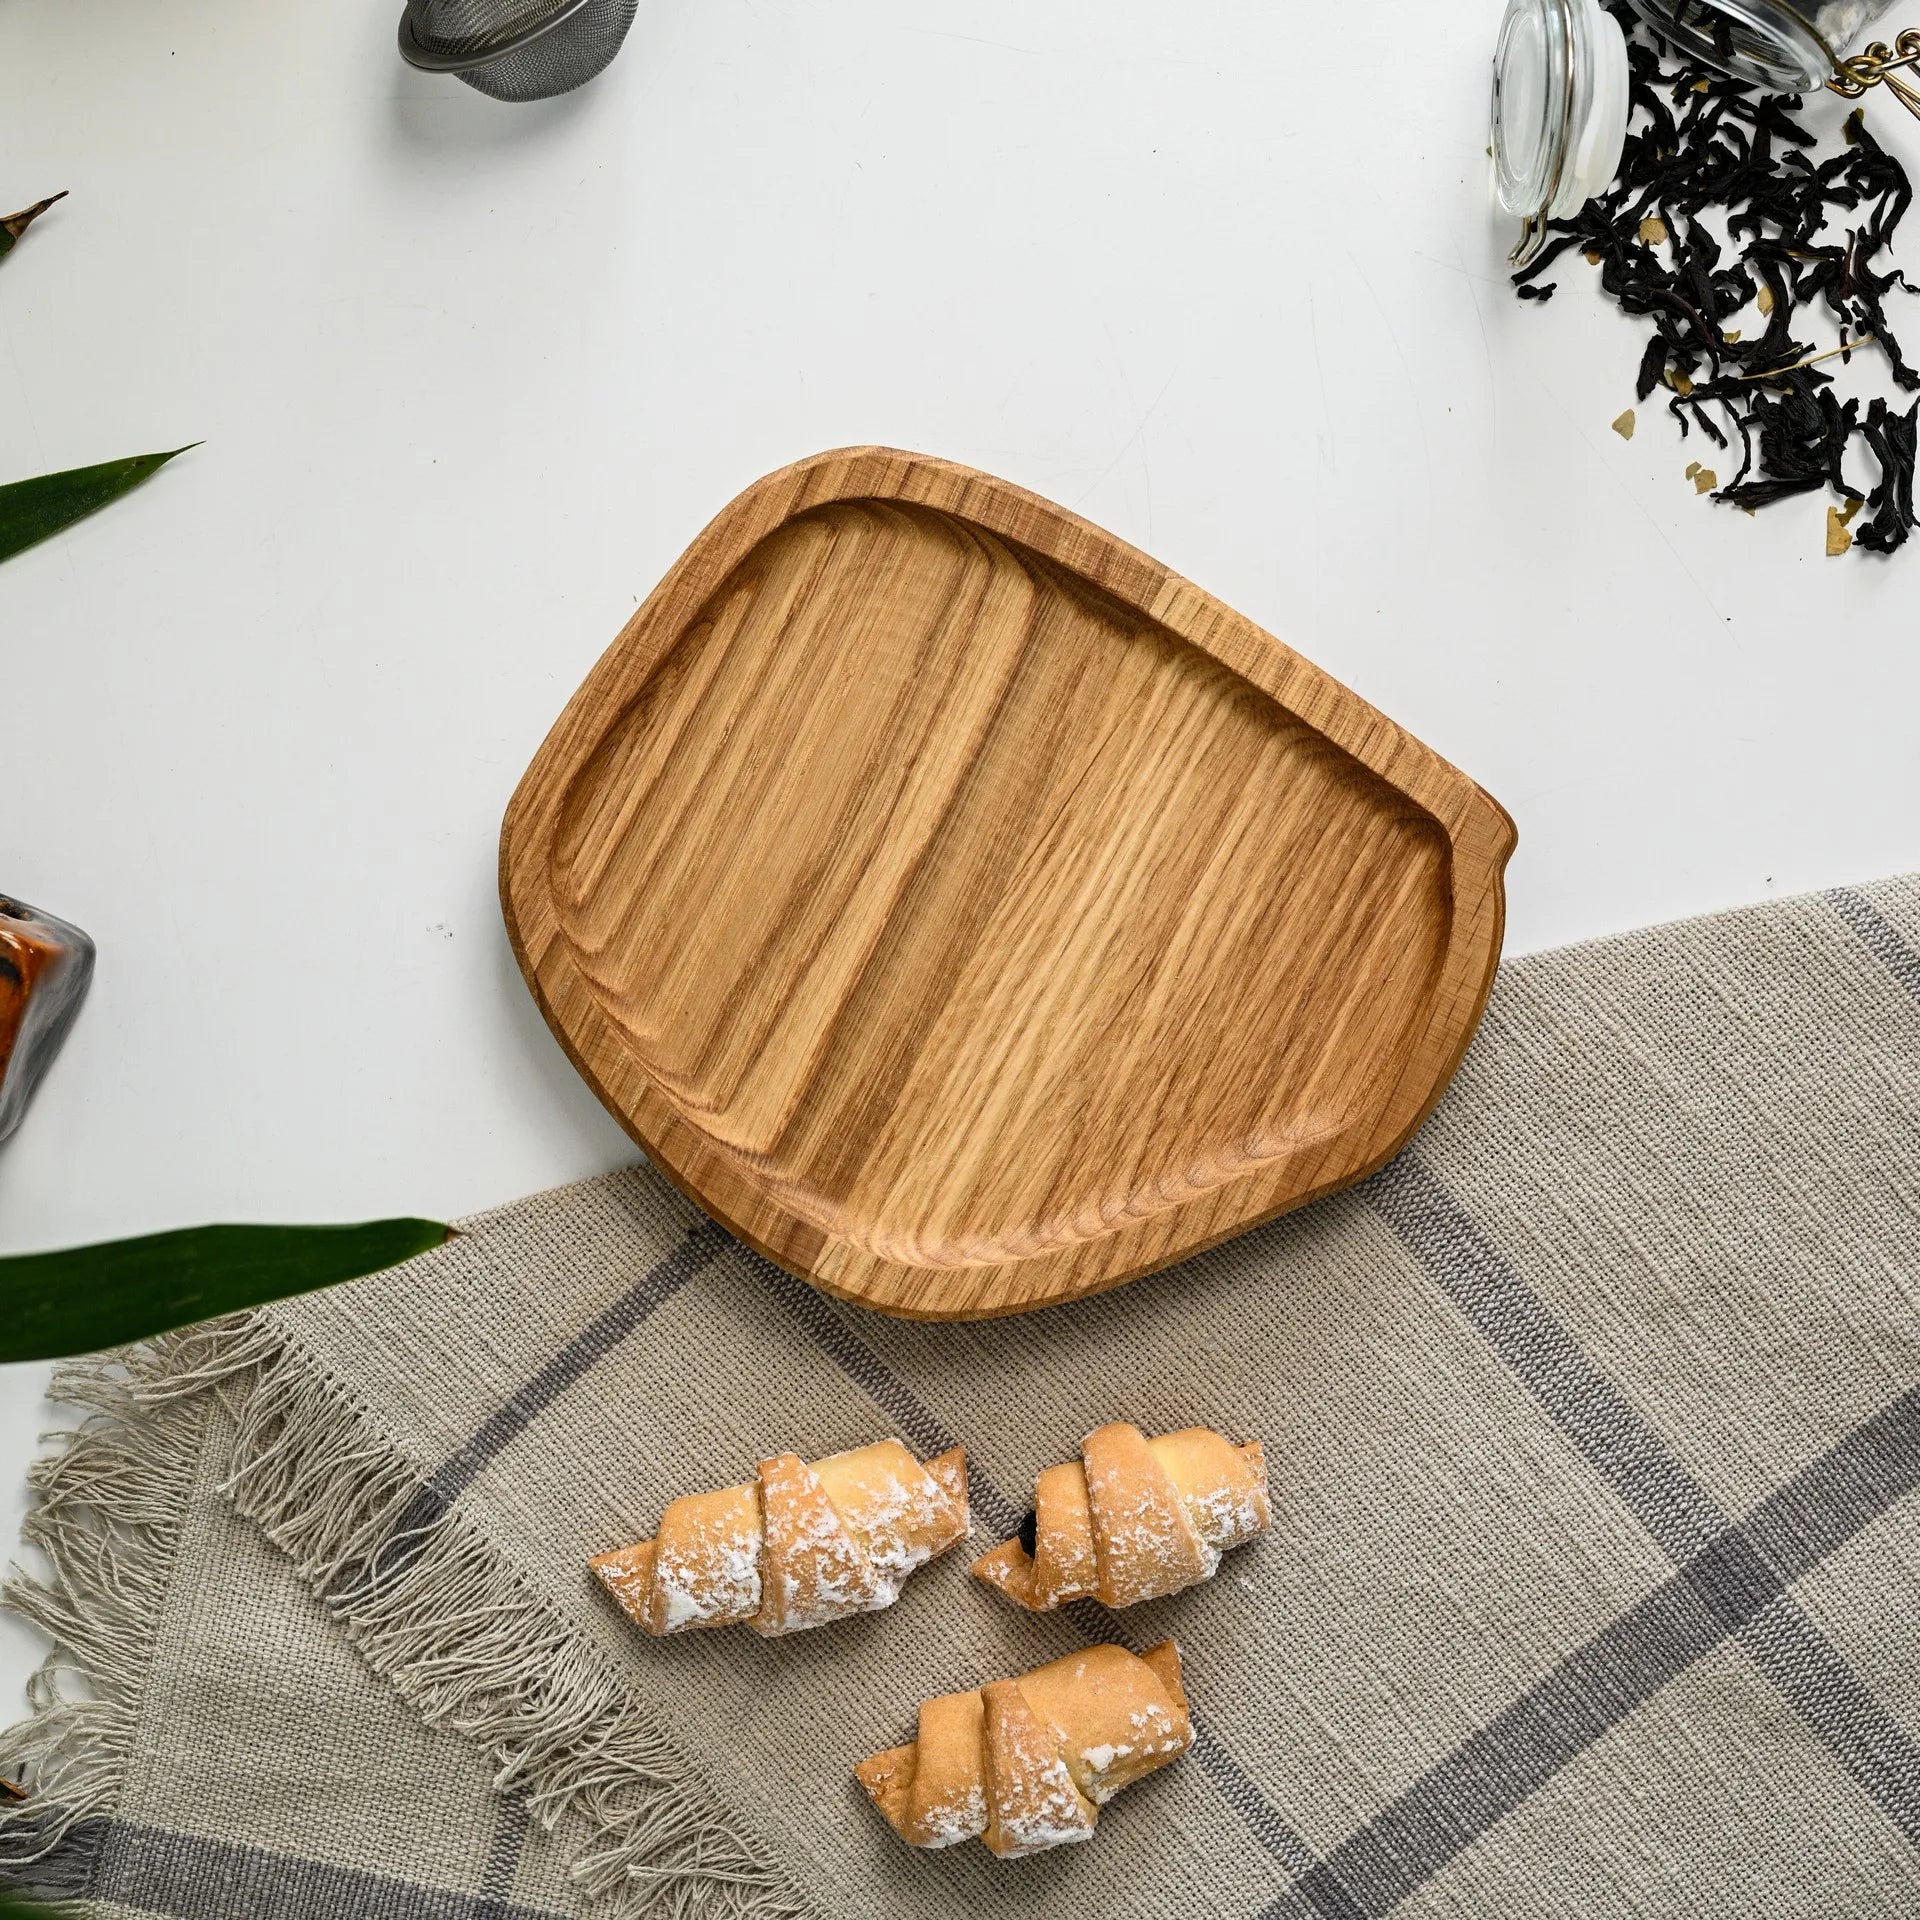 Rustic cafe serving tray, designed for a cozy dining atmosphere.